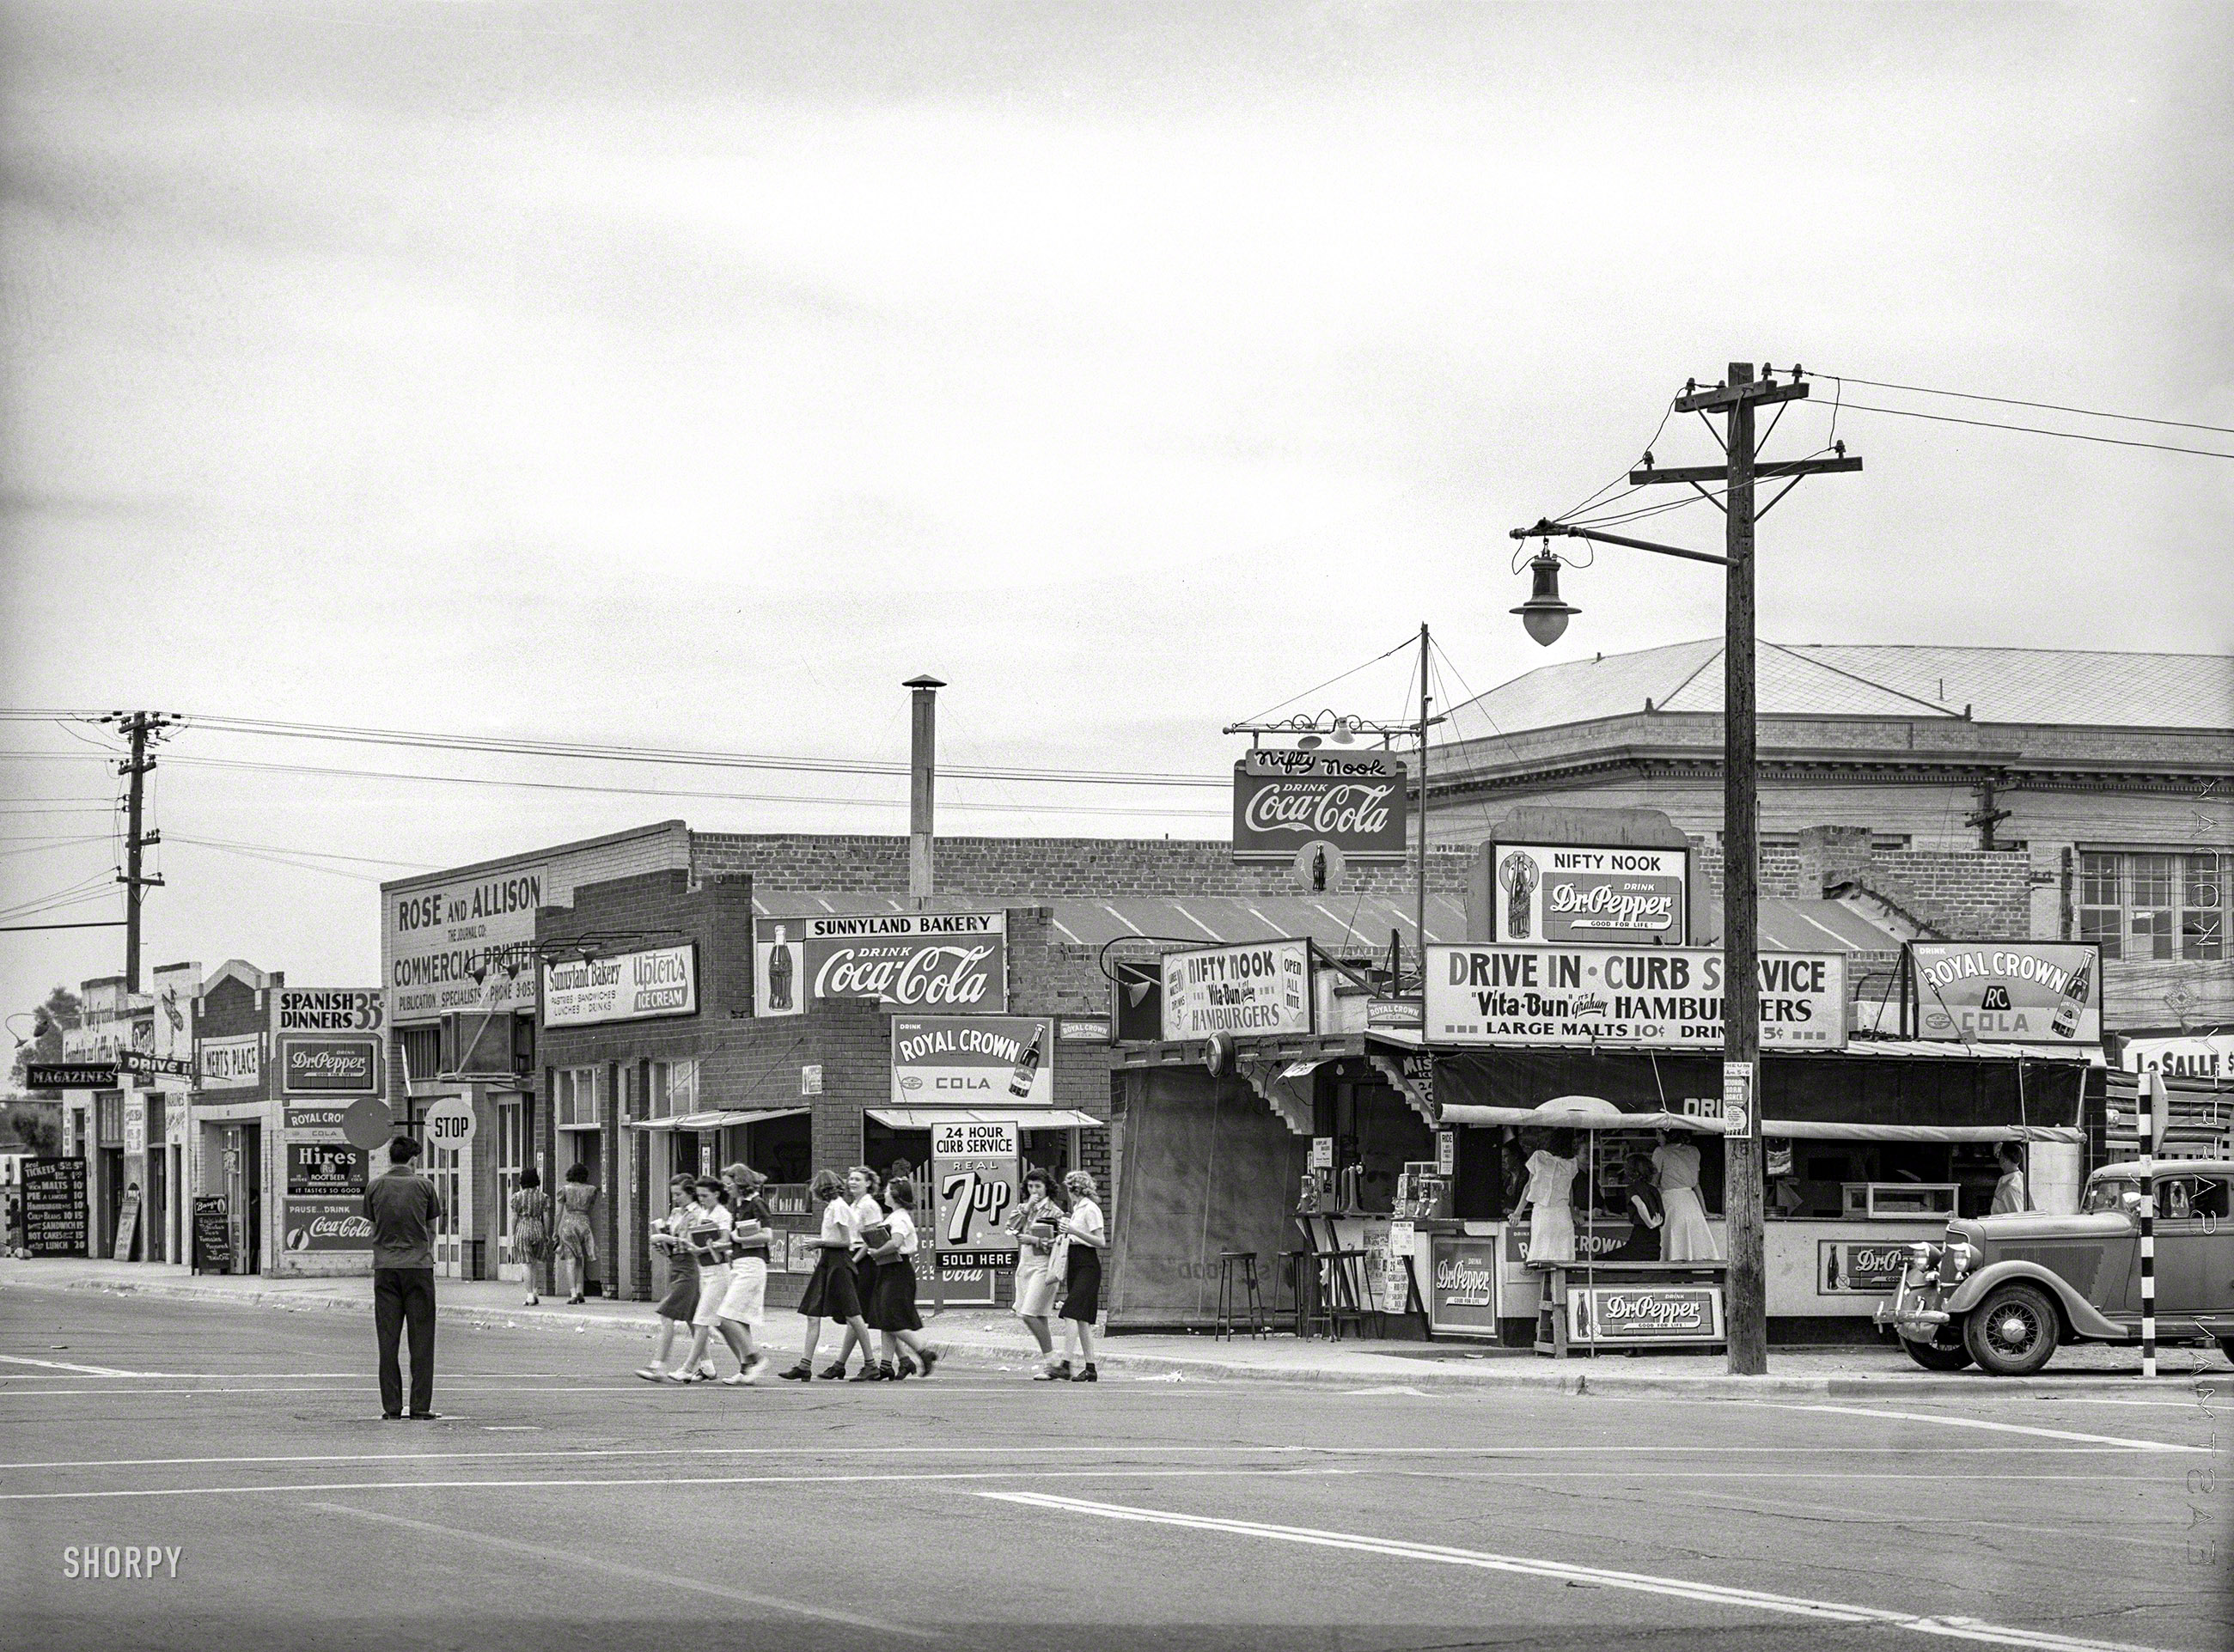 May 1940. "High school students crossing the street. Phoenix, Arizona." Medium format negative by Russell Lee for the Farm Security Admin. View full size.